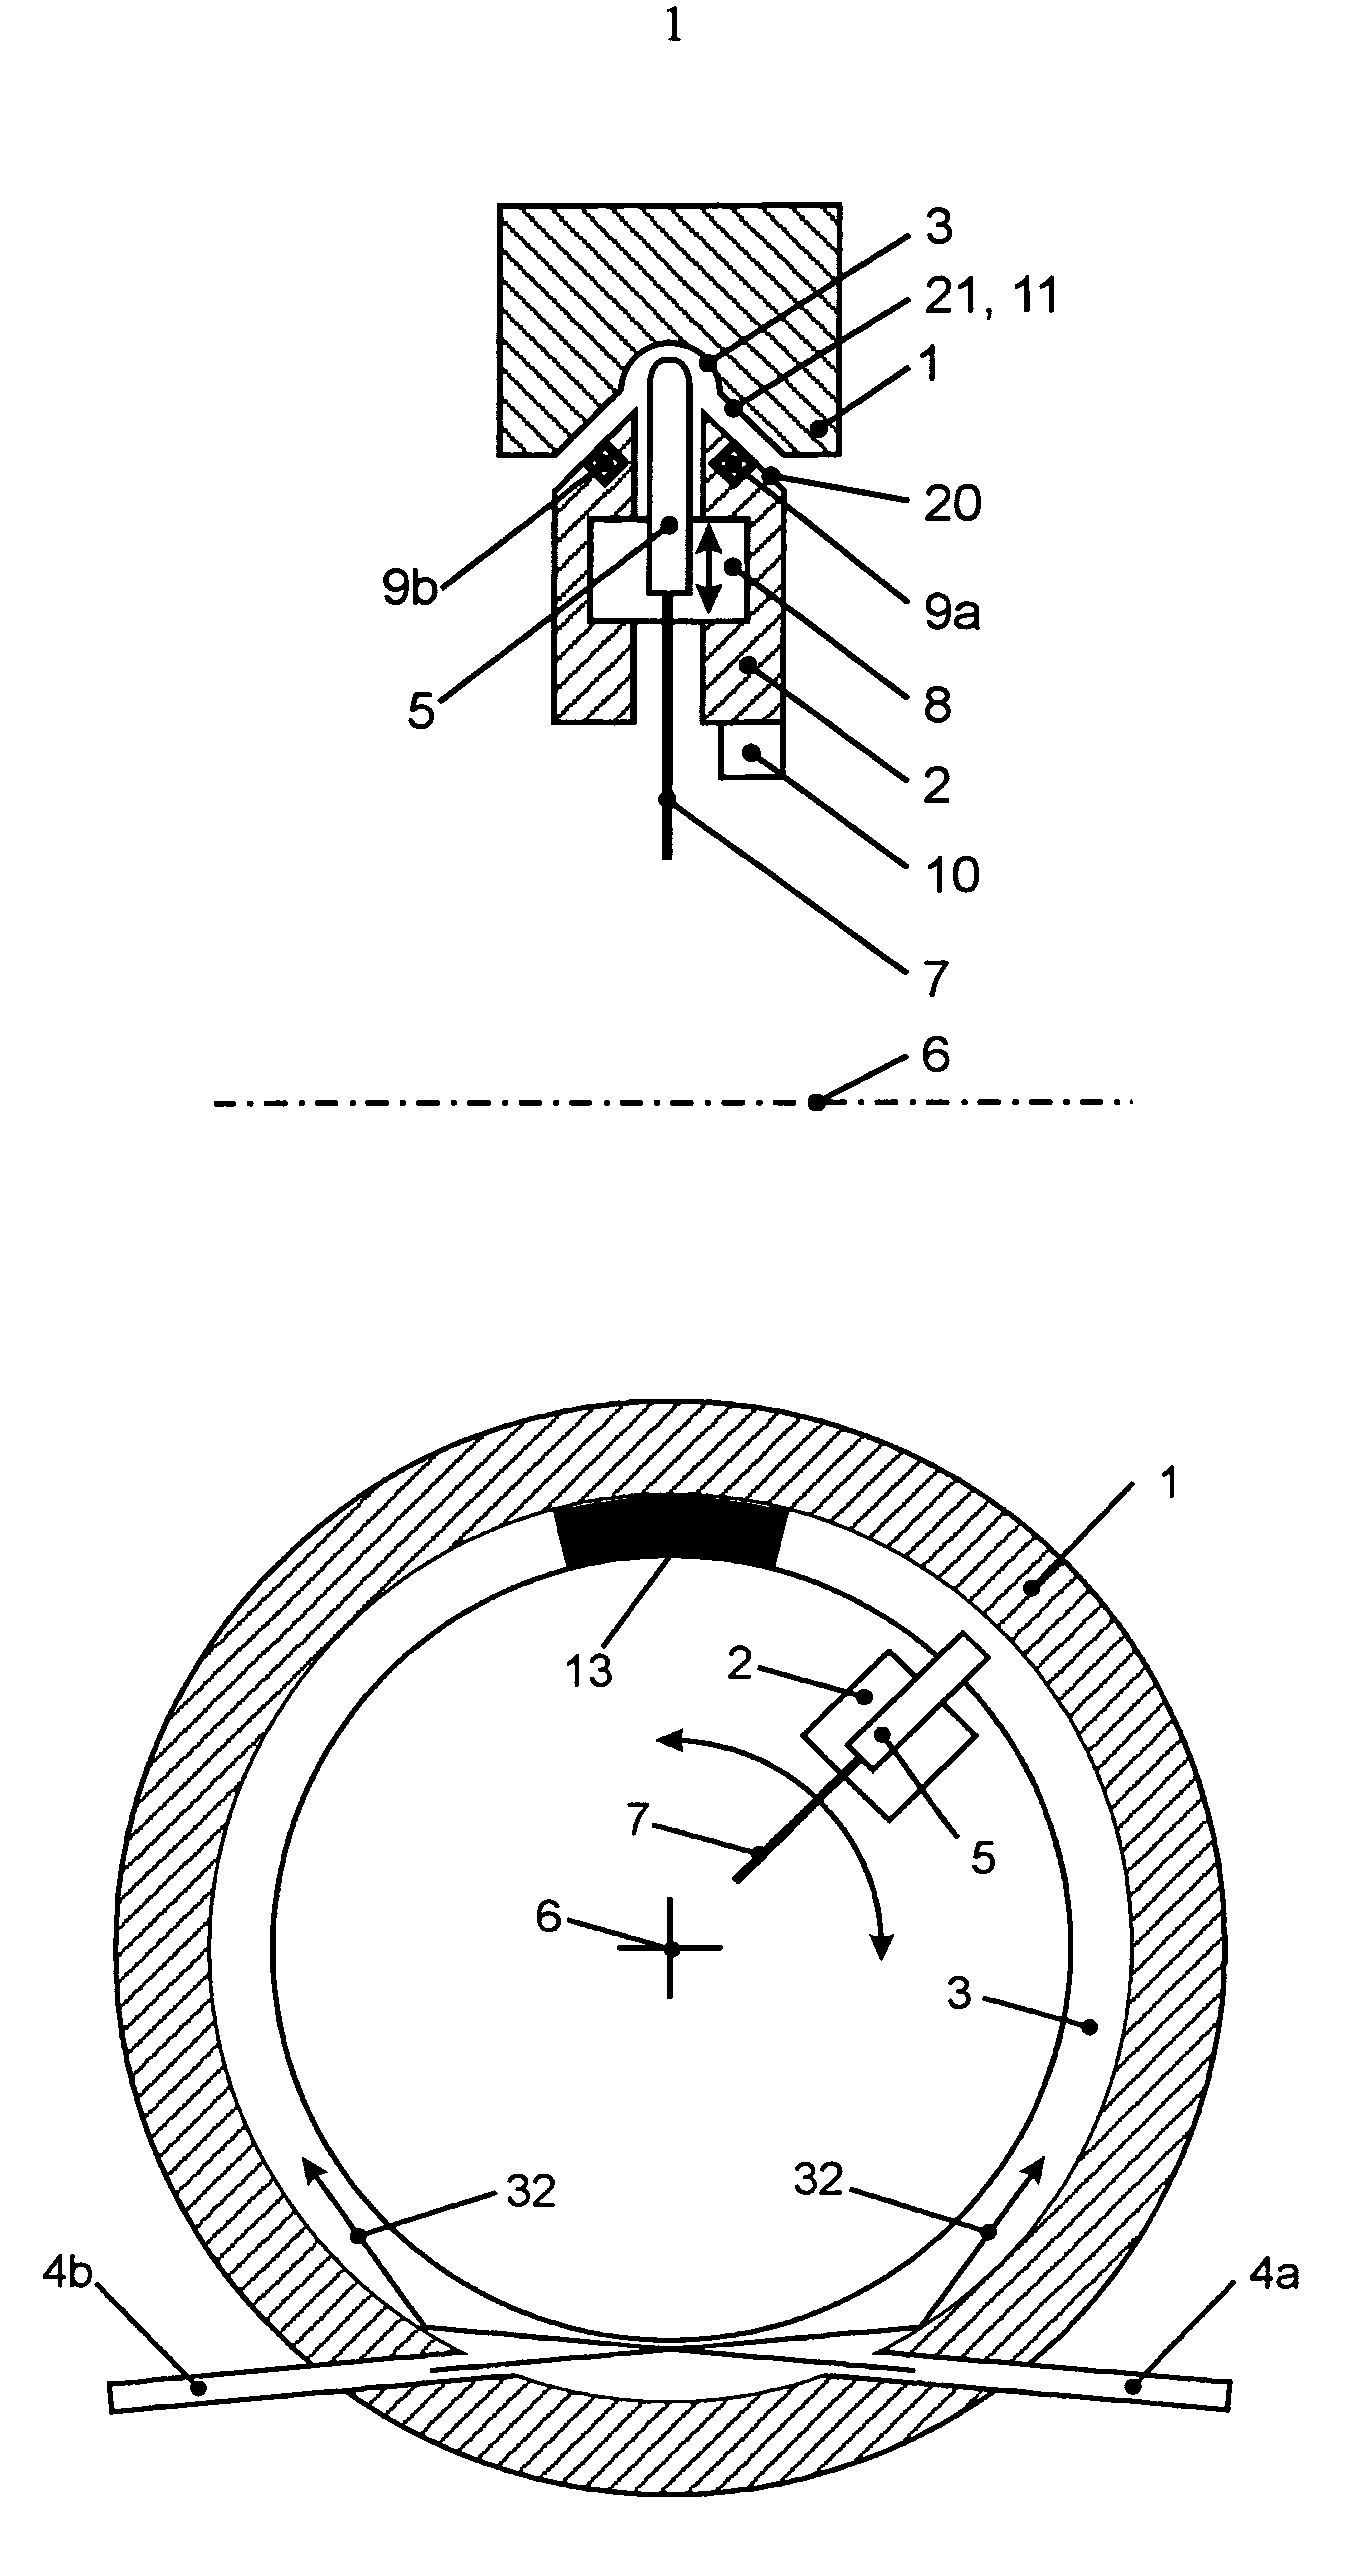 Optical rotating data transmission device having an unobstructed inner diameter